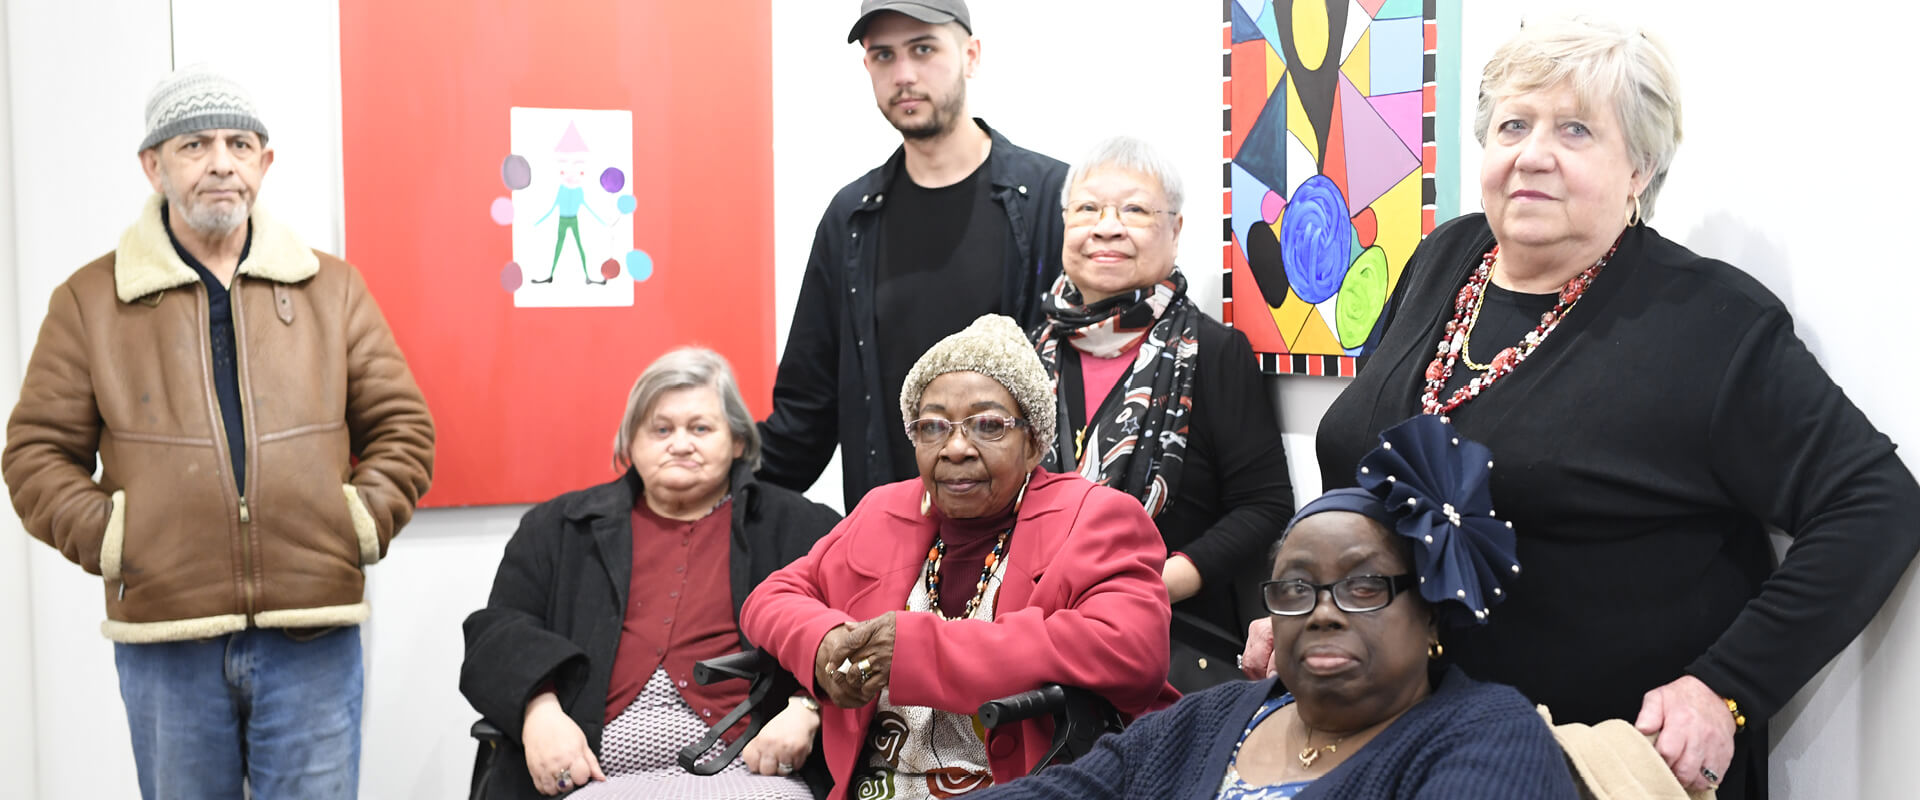 Residents attend art show event